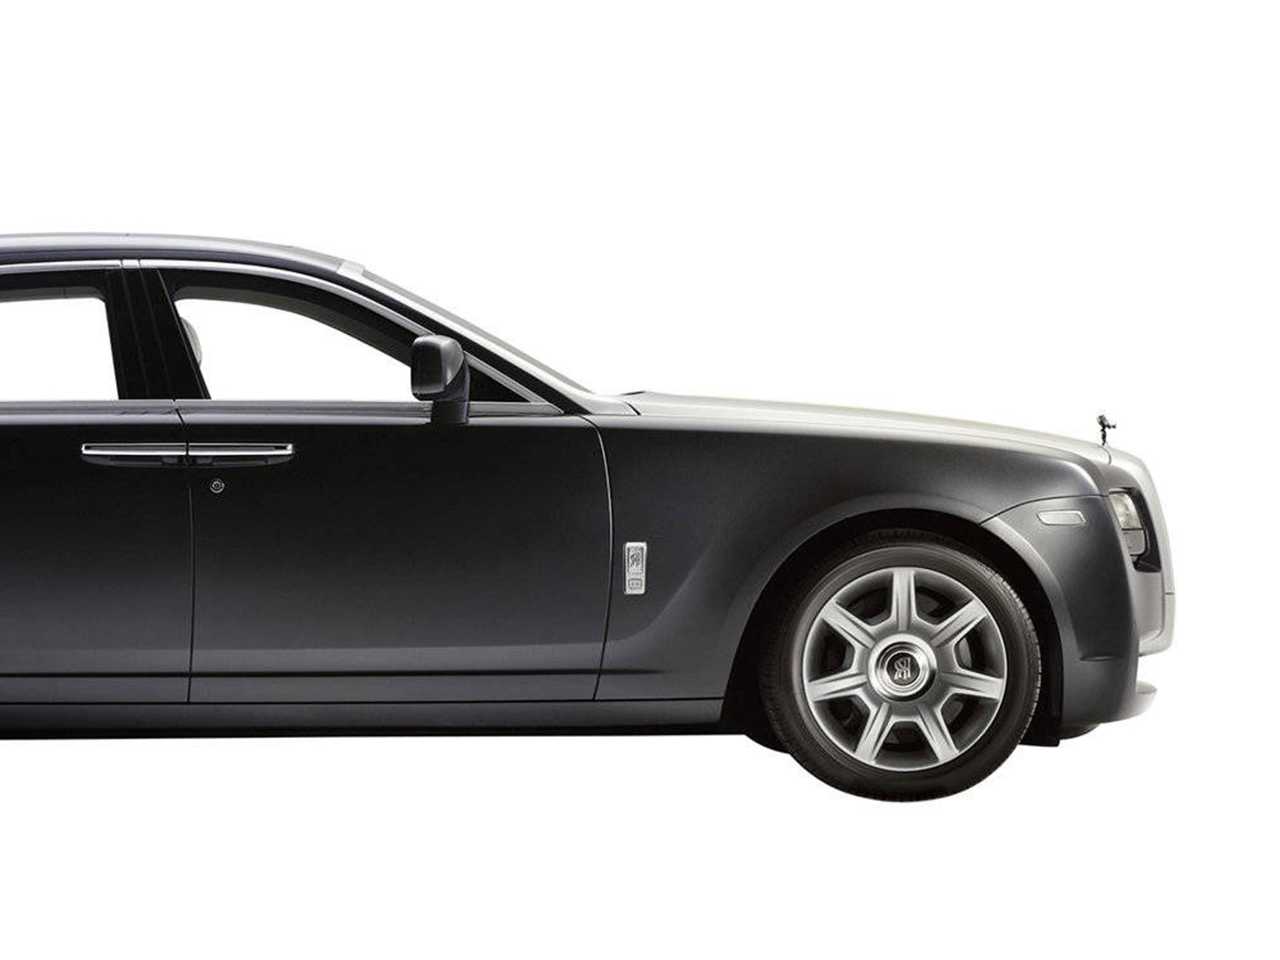 Rolls Royce Ghost hire in London by Hertz Dream Collection